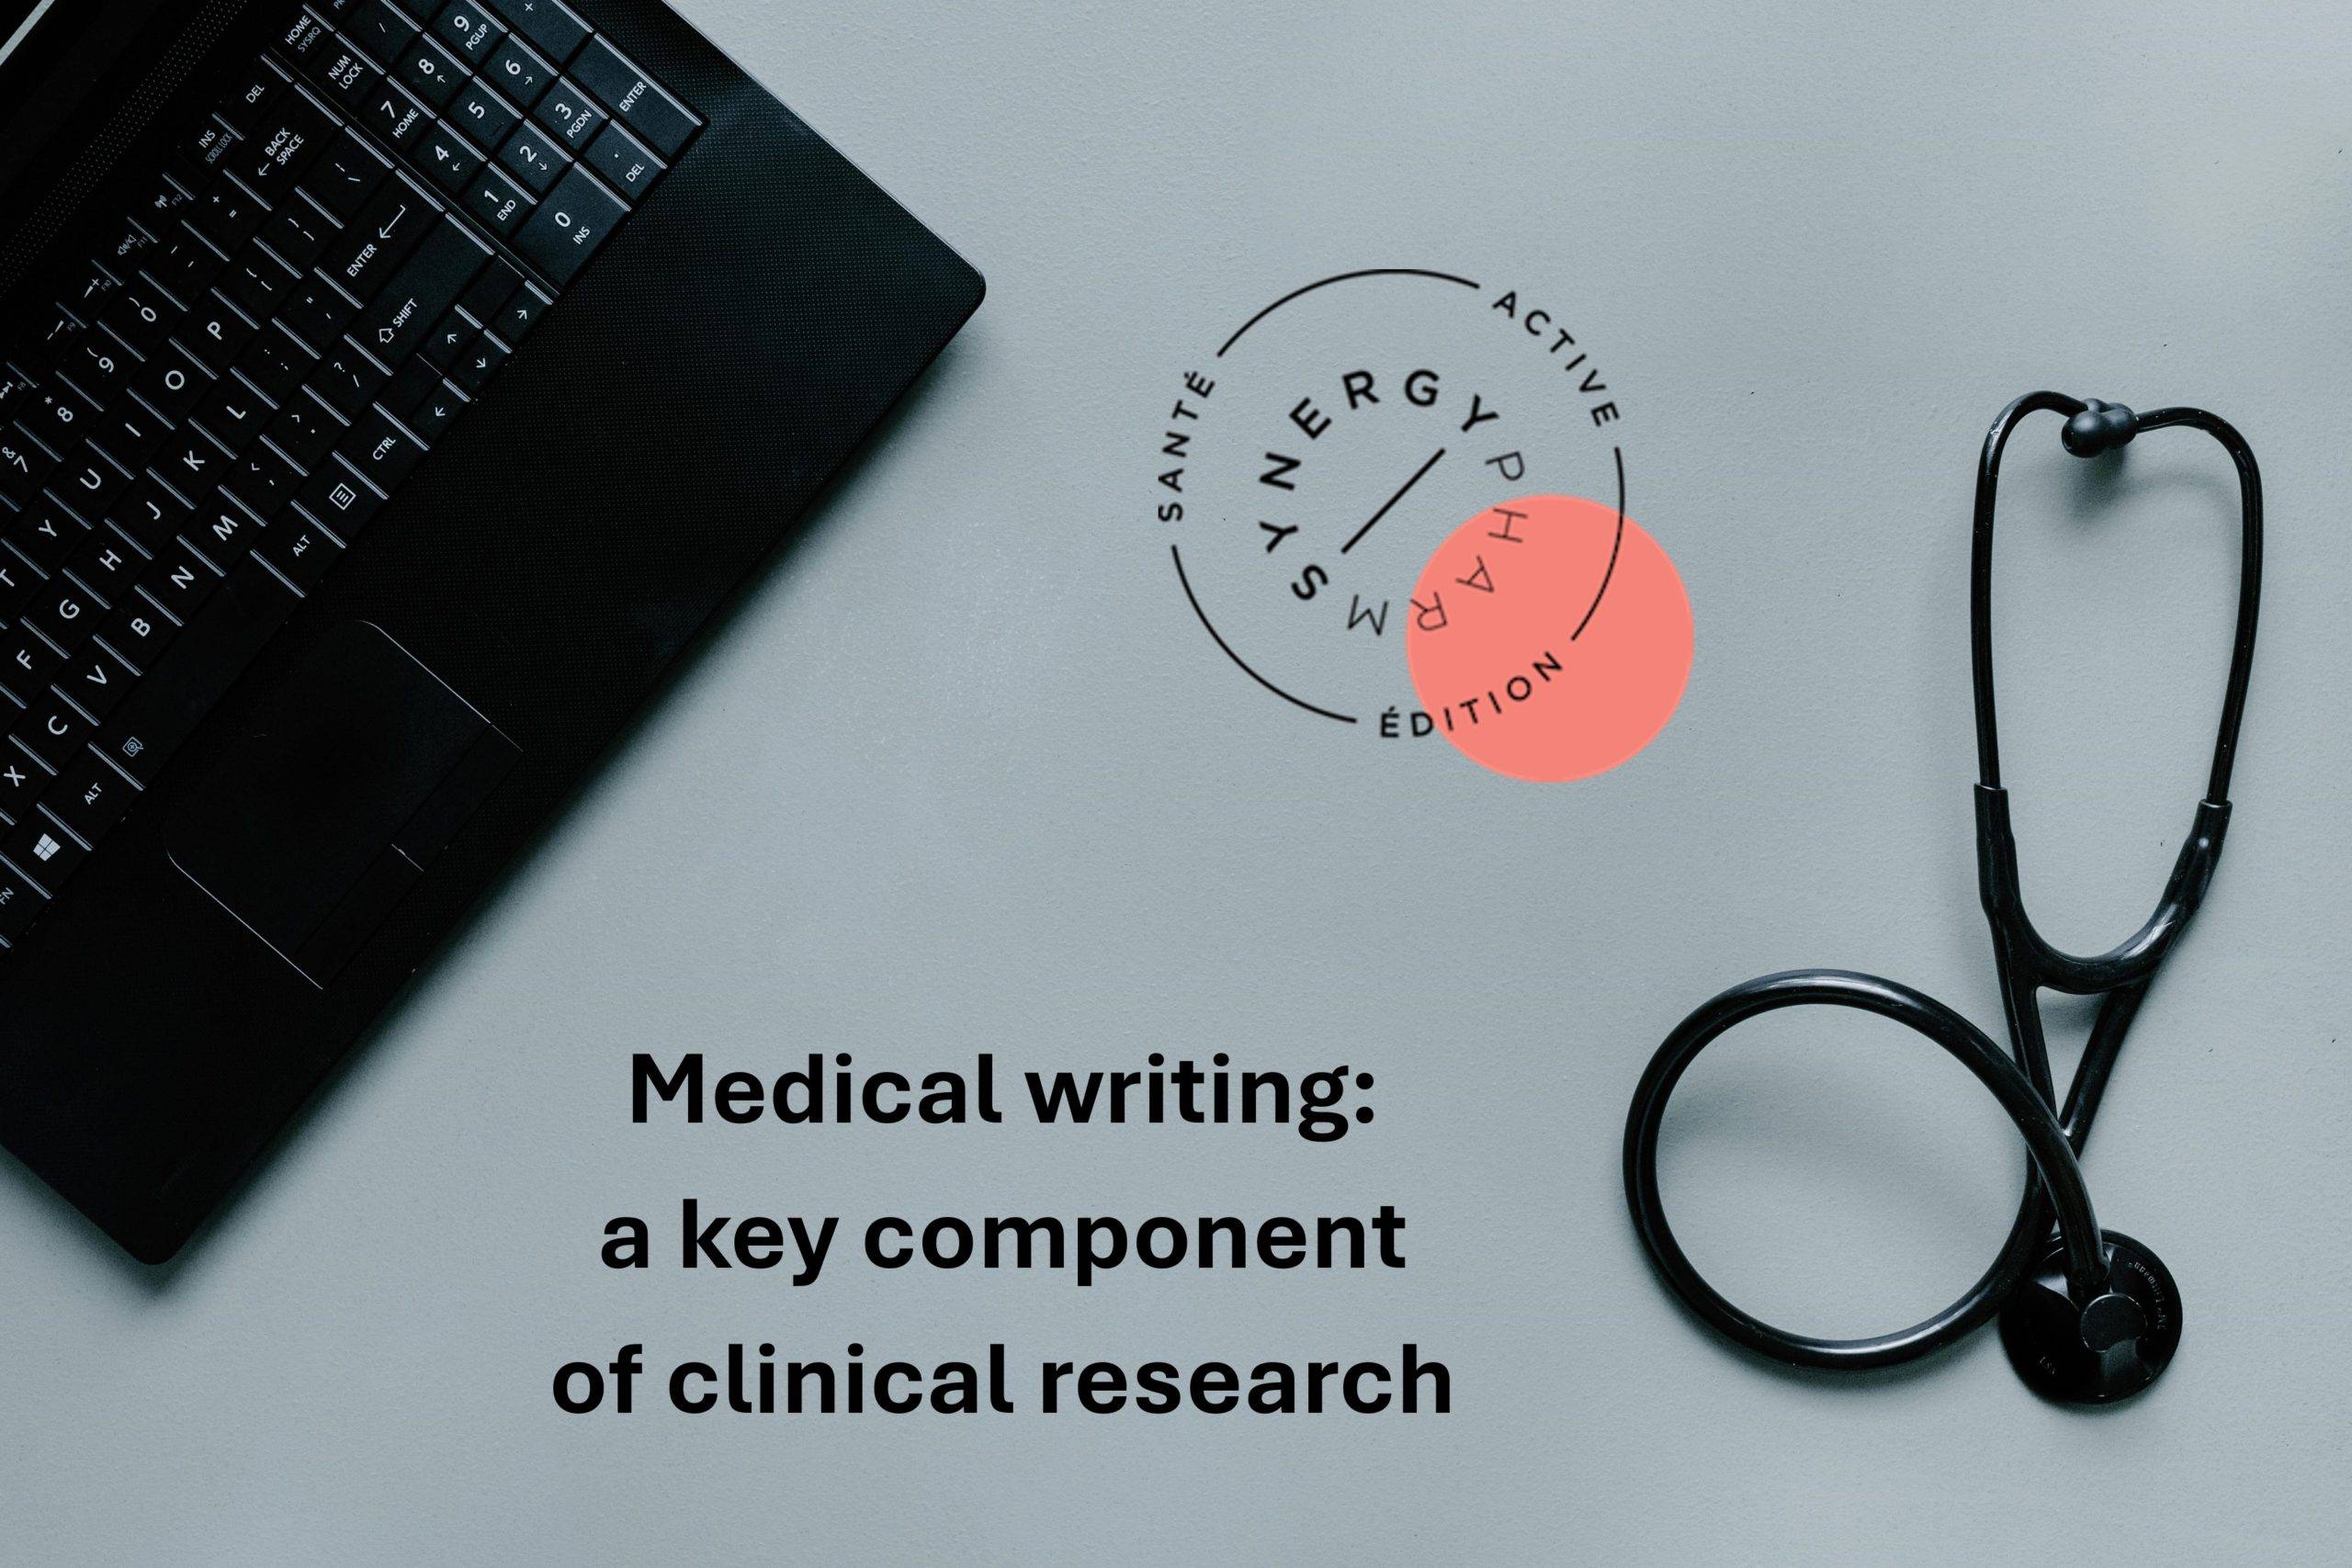 Medical writing: a key component of clinical research